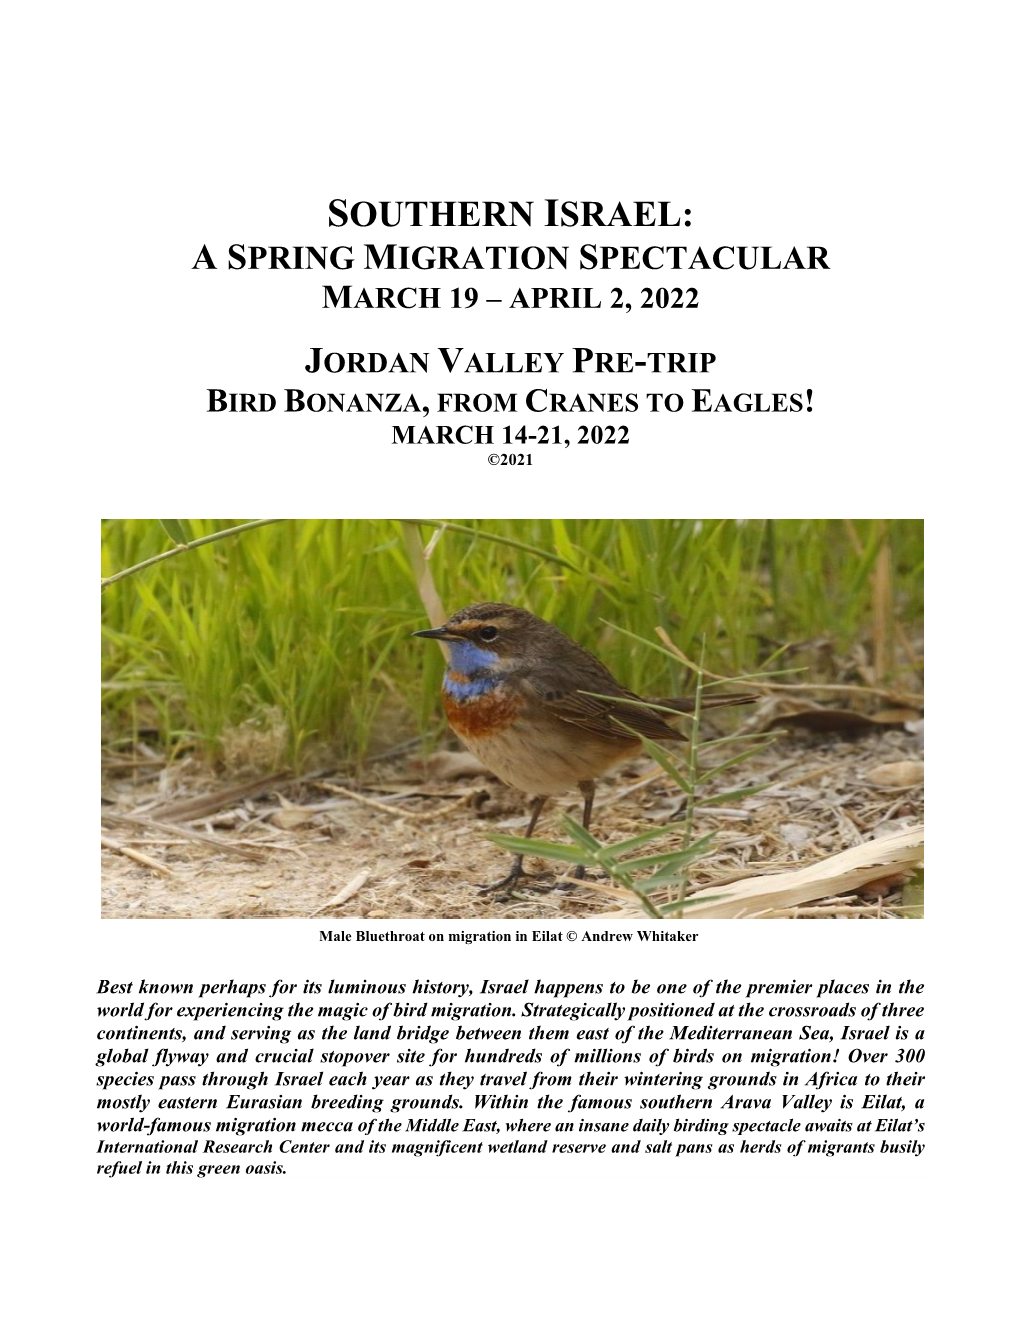 Southern Israel: a Spring Migration Spectacular March 19 – April 2, 2022